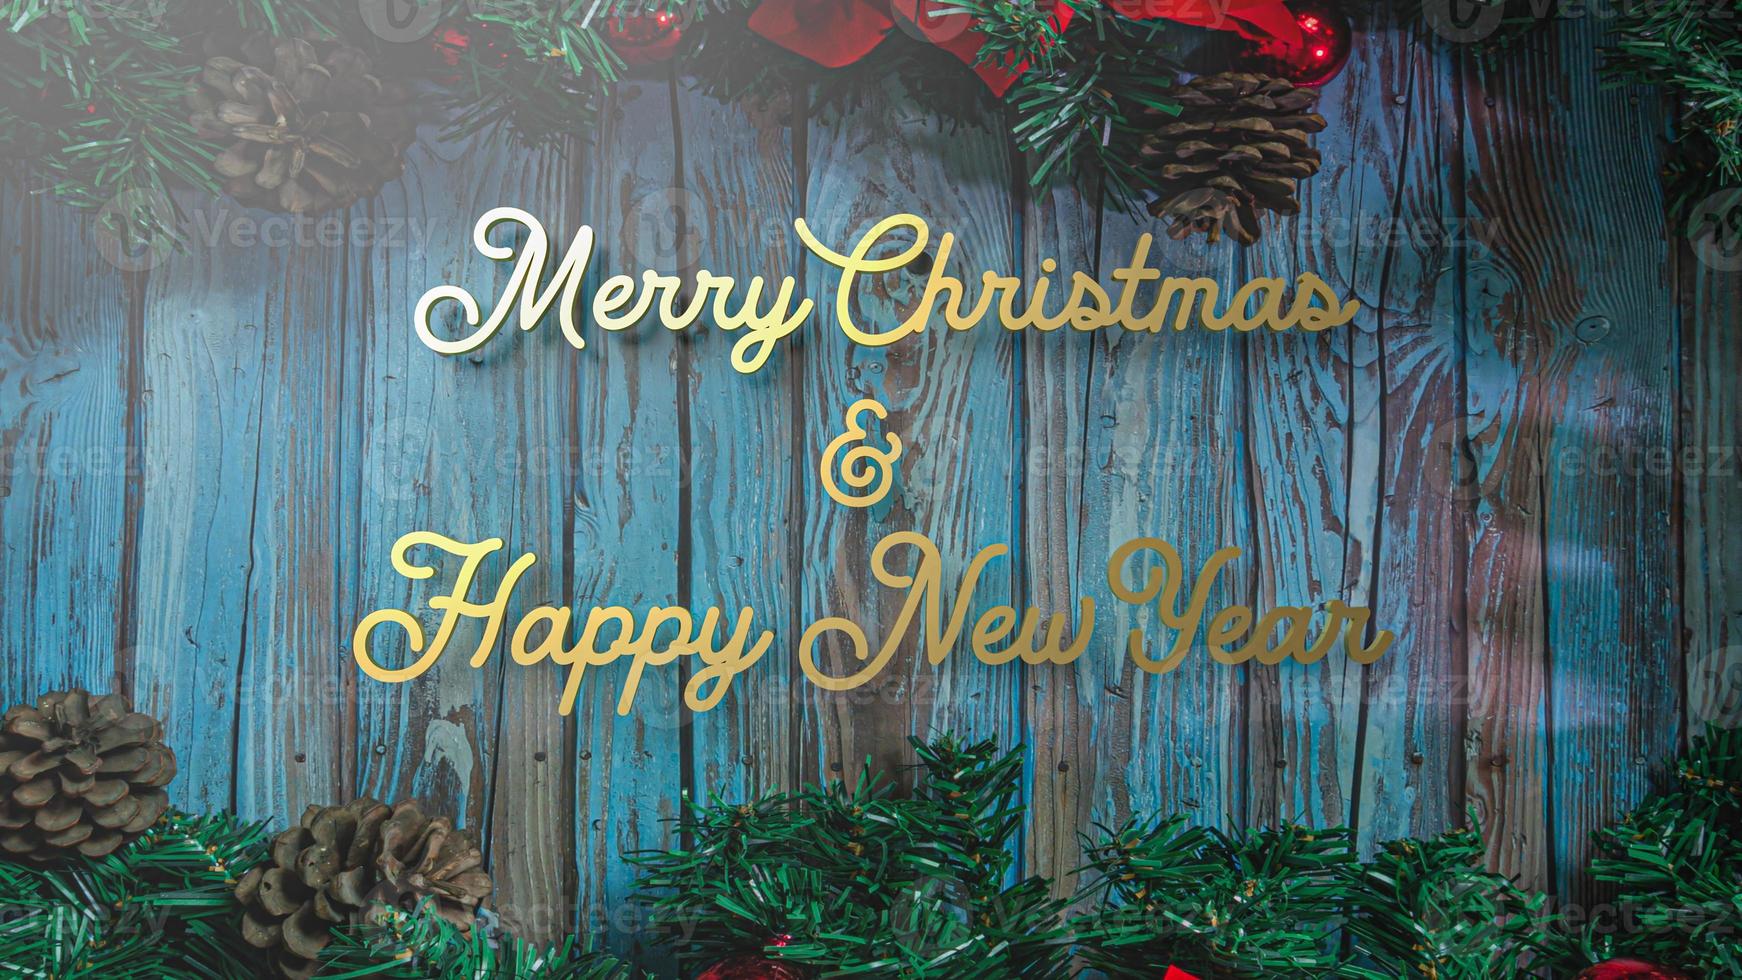 The gold merry Christmas and  happy new year  text on wood for Christmas or holiday concept 3d rendering photo